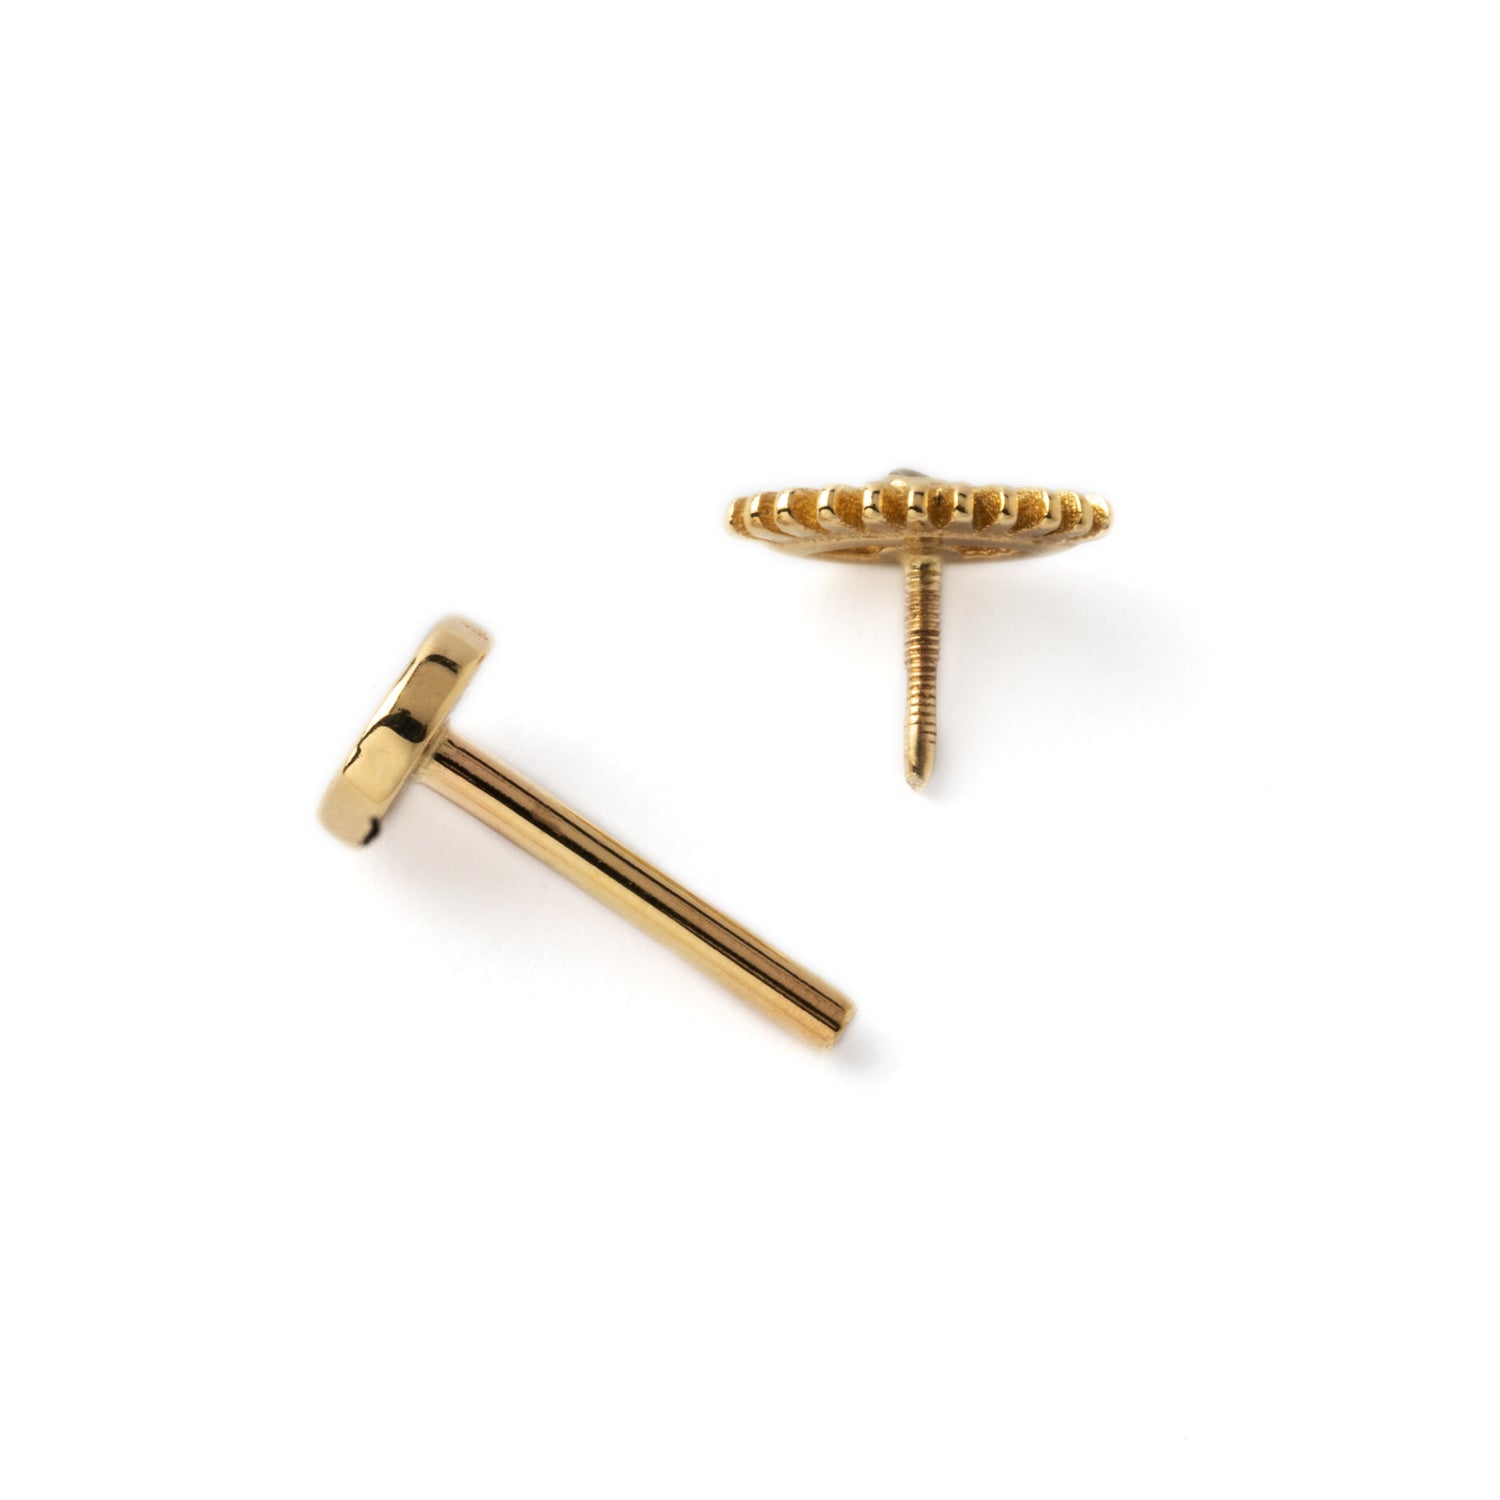 14k Gold internally threaded screw back earring 1.2mm (16g), 8mm, evil eye labret with centred cz closure view